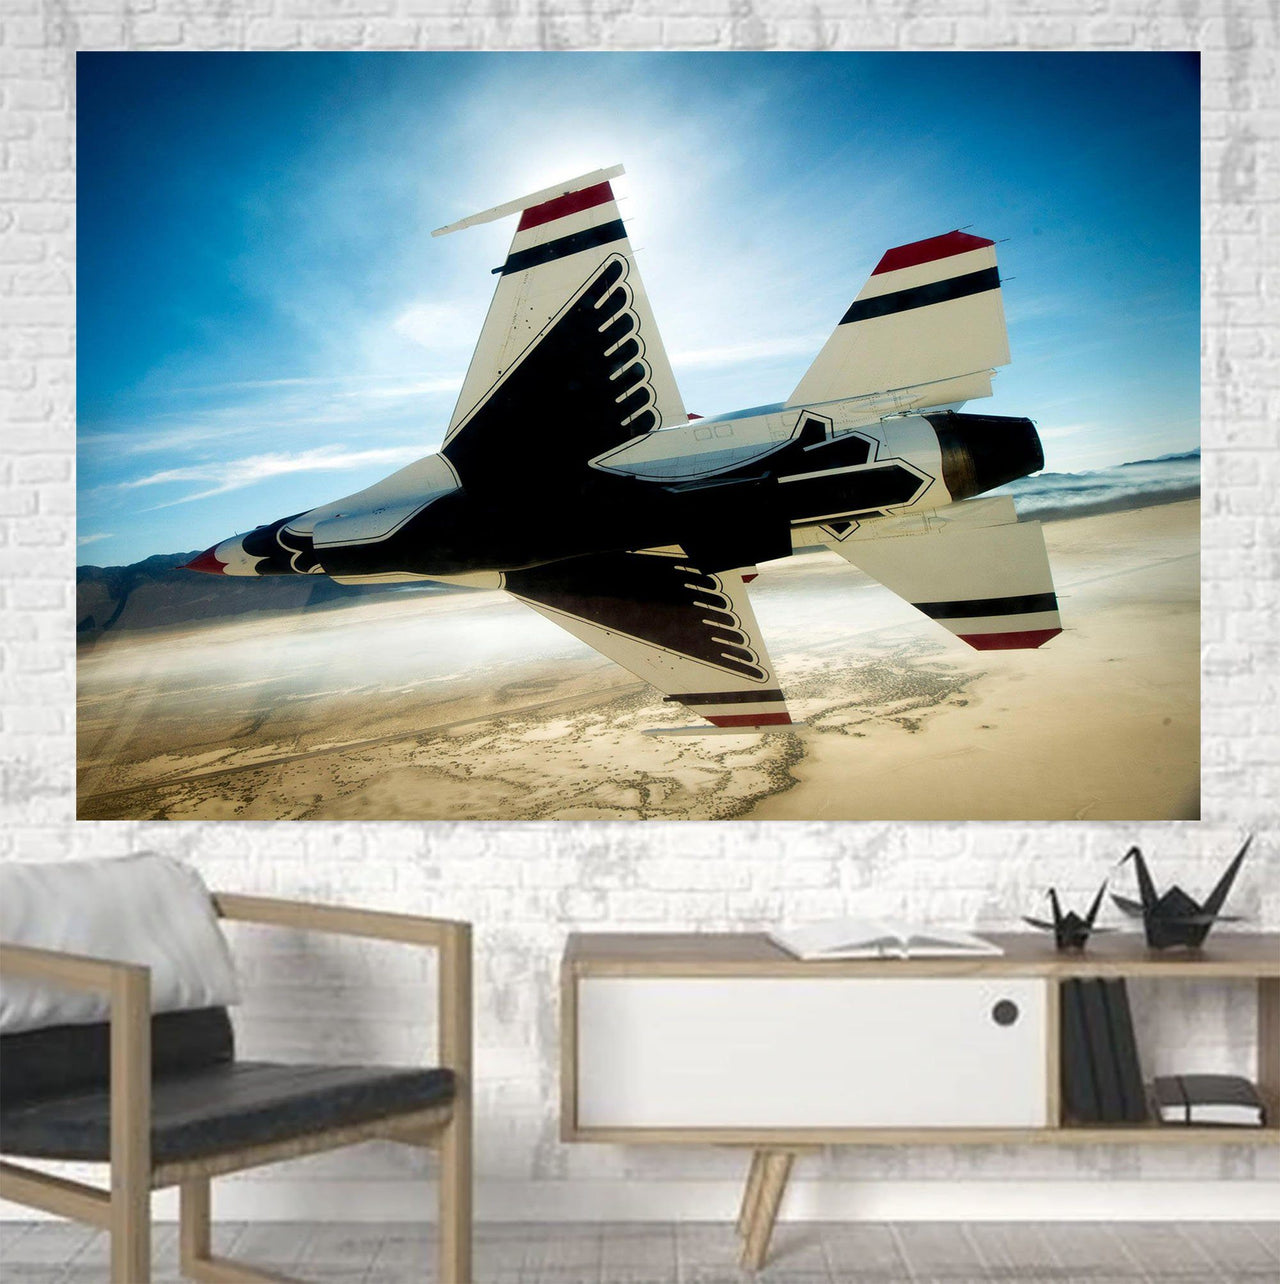 Turning Right Fighting Falcon F16 Printed Canvas Posters (1 Piece) Aviation Shop 